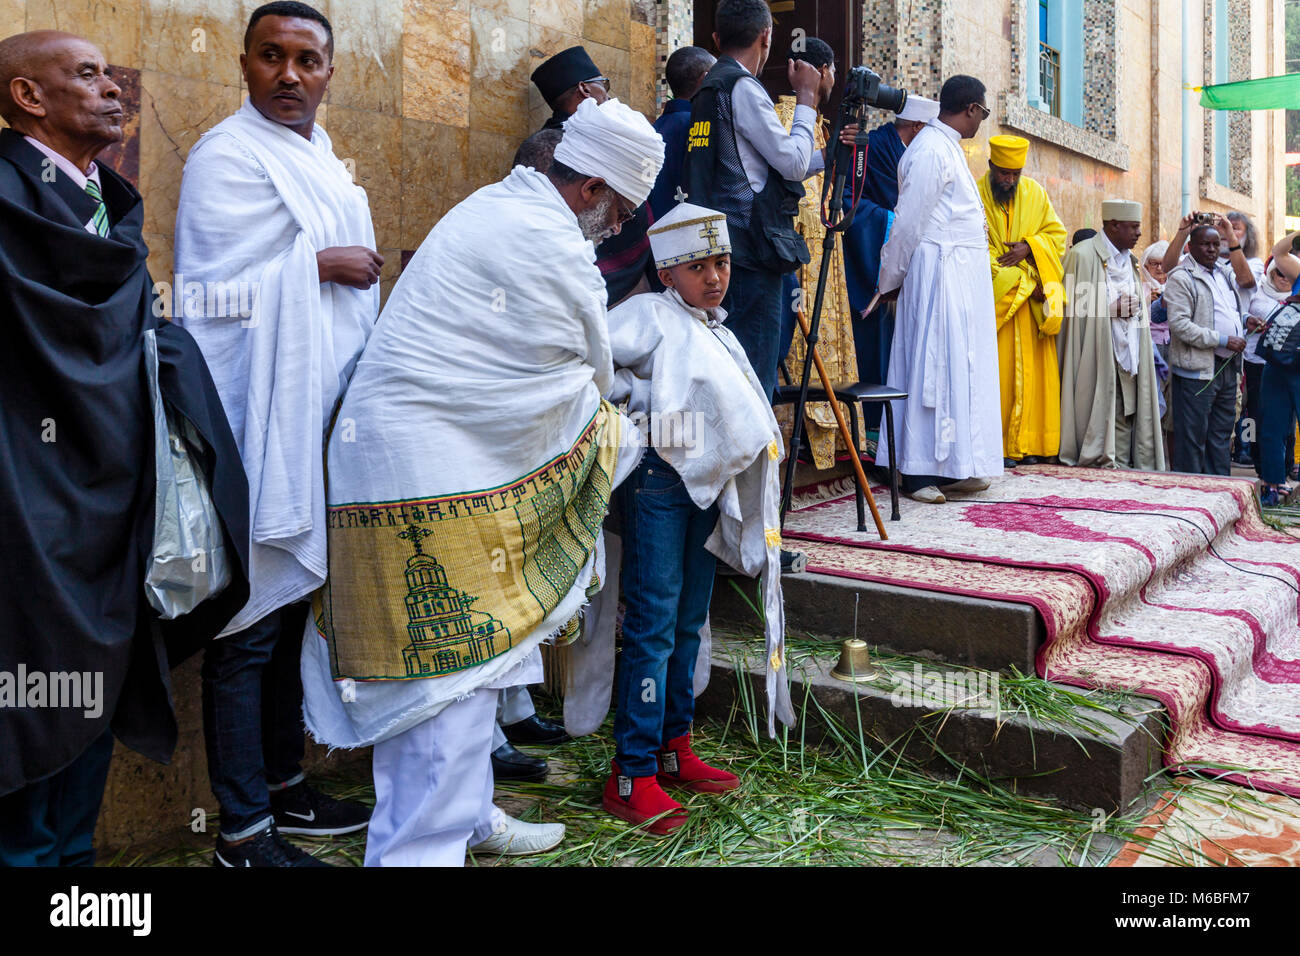 Ethiopian Orthodox Christian Priests and Deacons Celebrate The Three Day Festival Of Timkat (Epiphany) At Kidist Mariam Church, Addis Ababa, Ethiopia Stock Photo